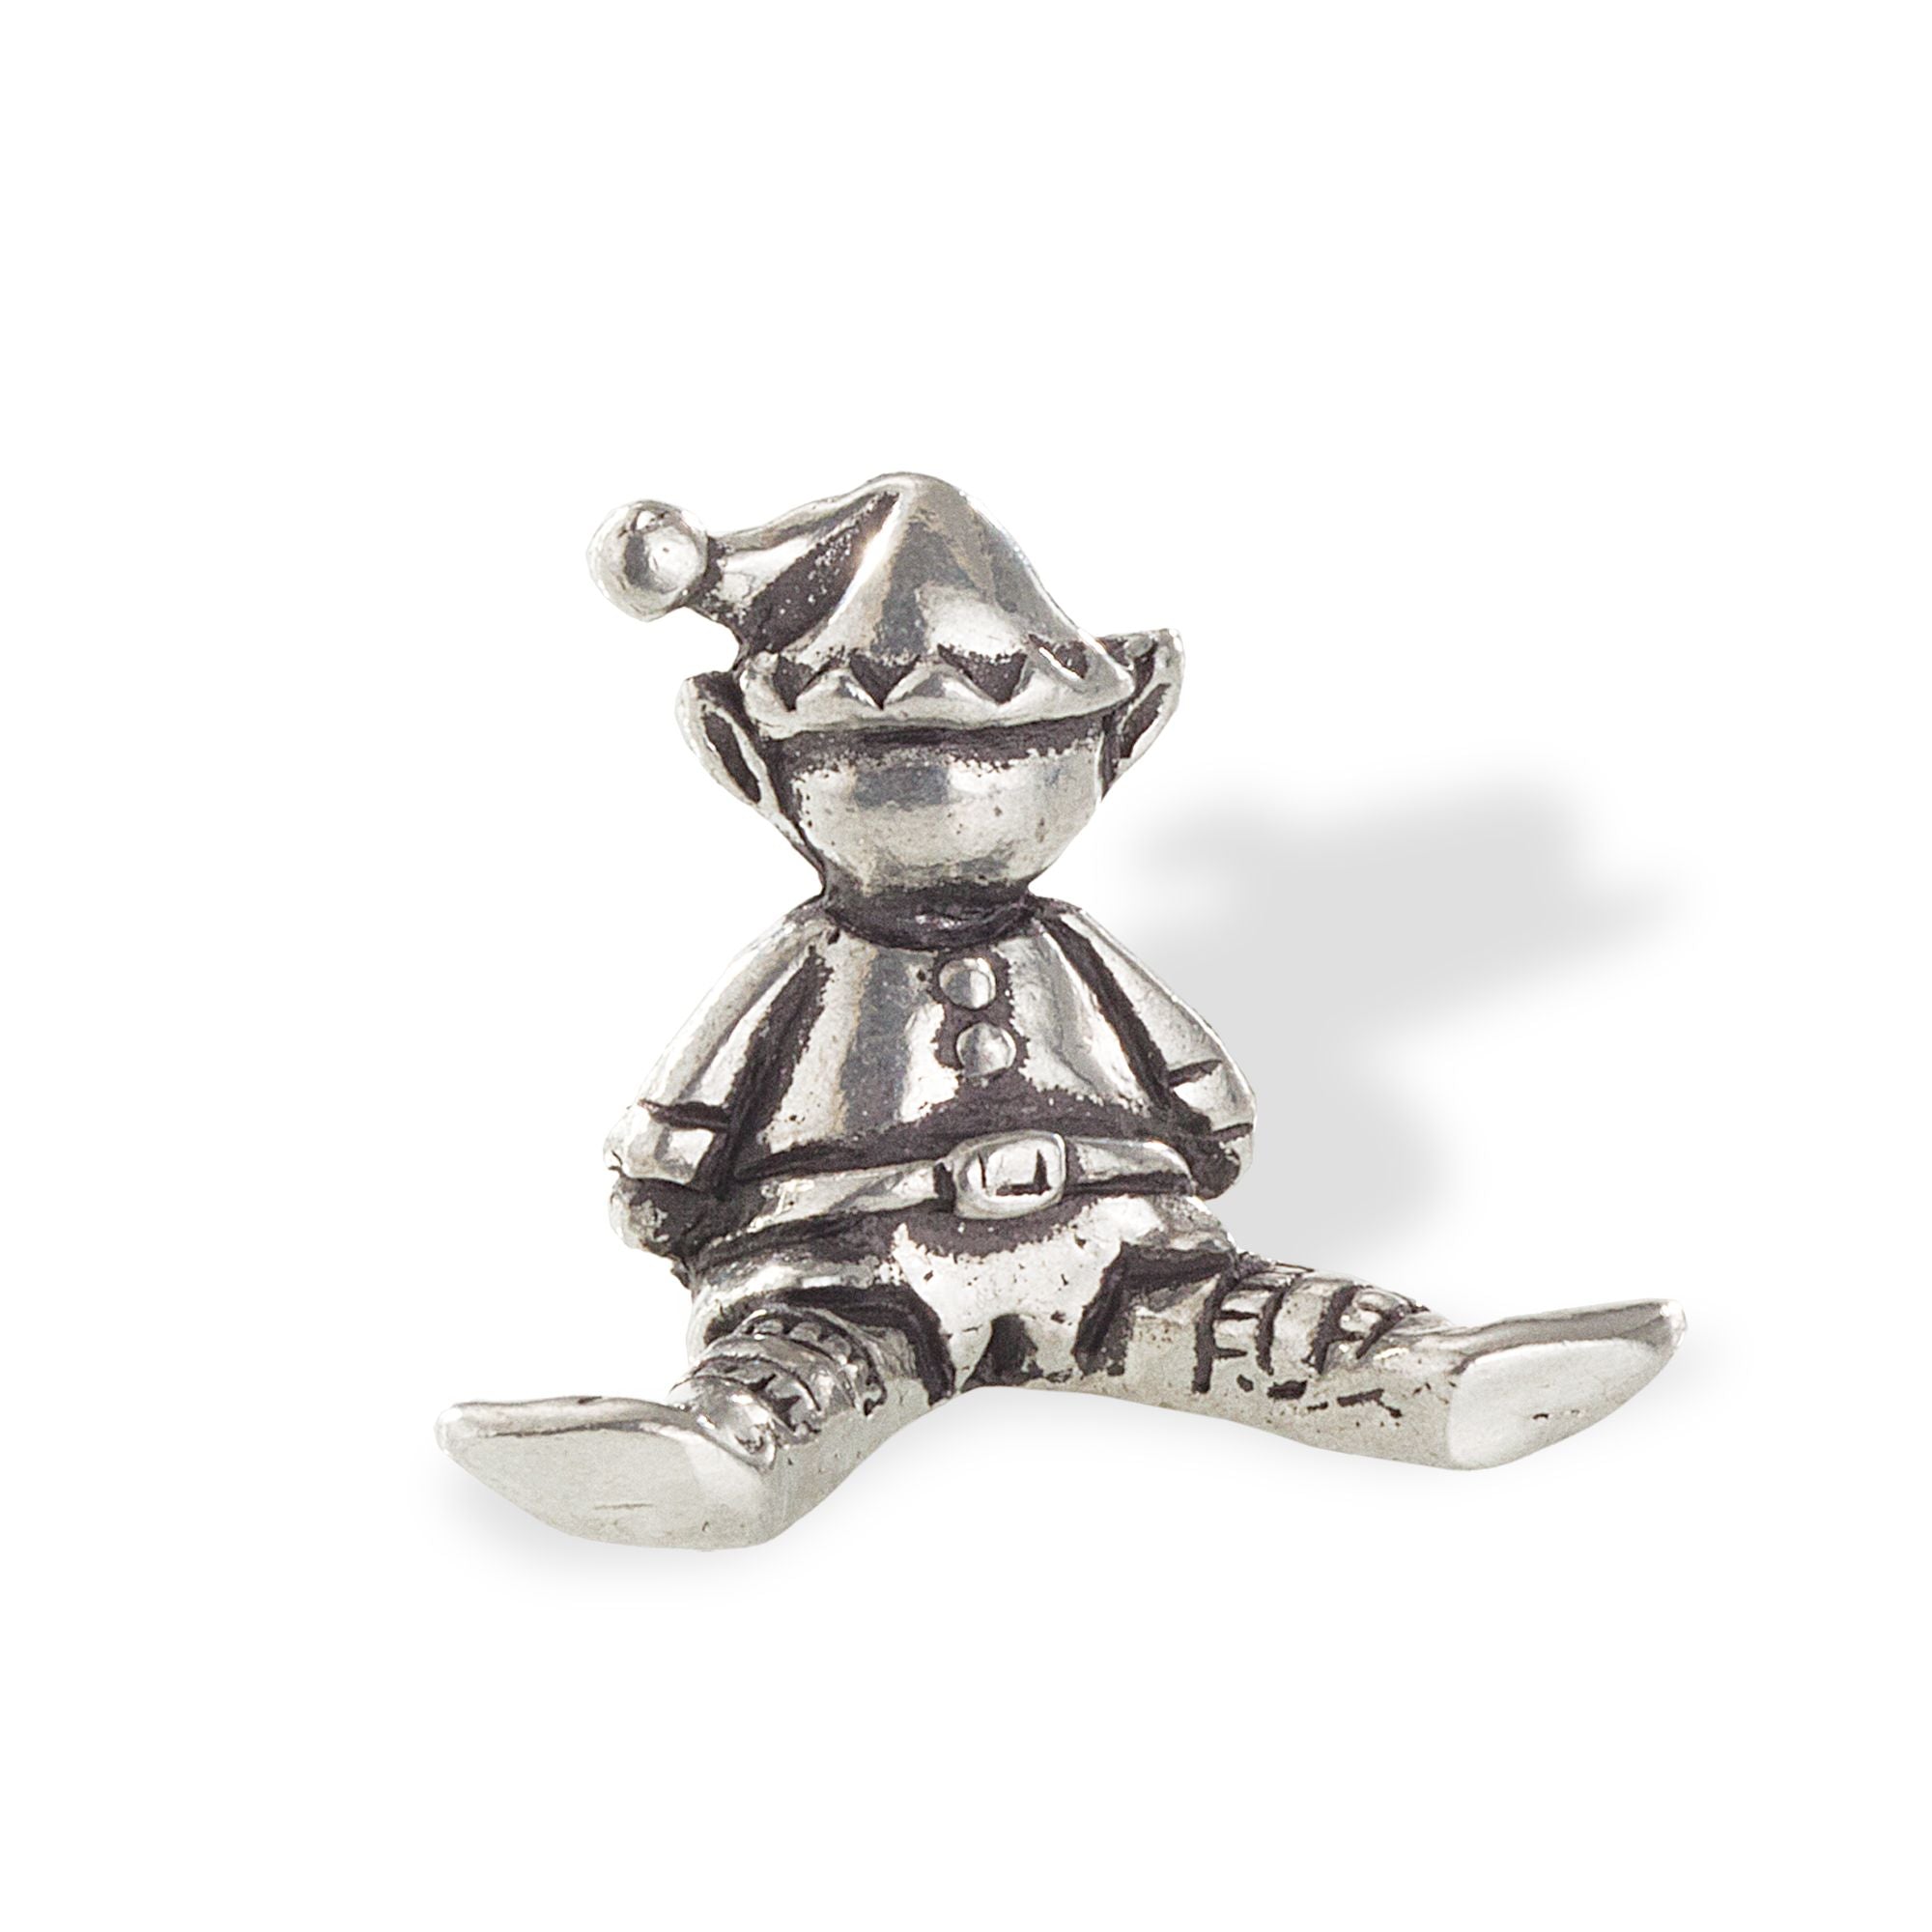 Pewter Holiday Elves Set of 5